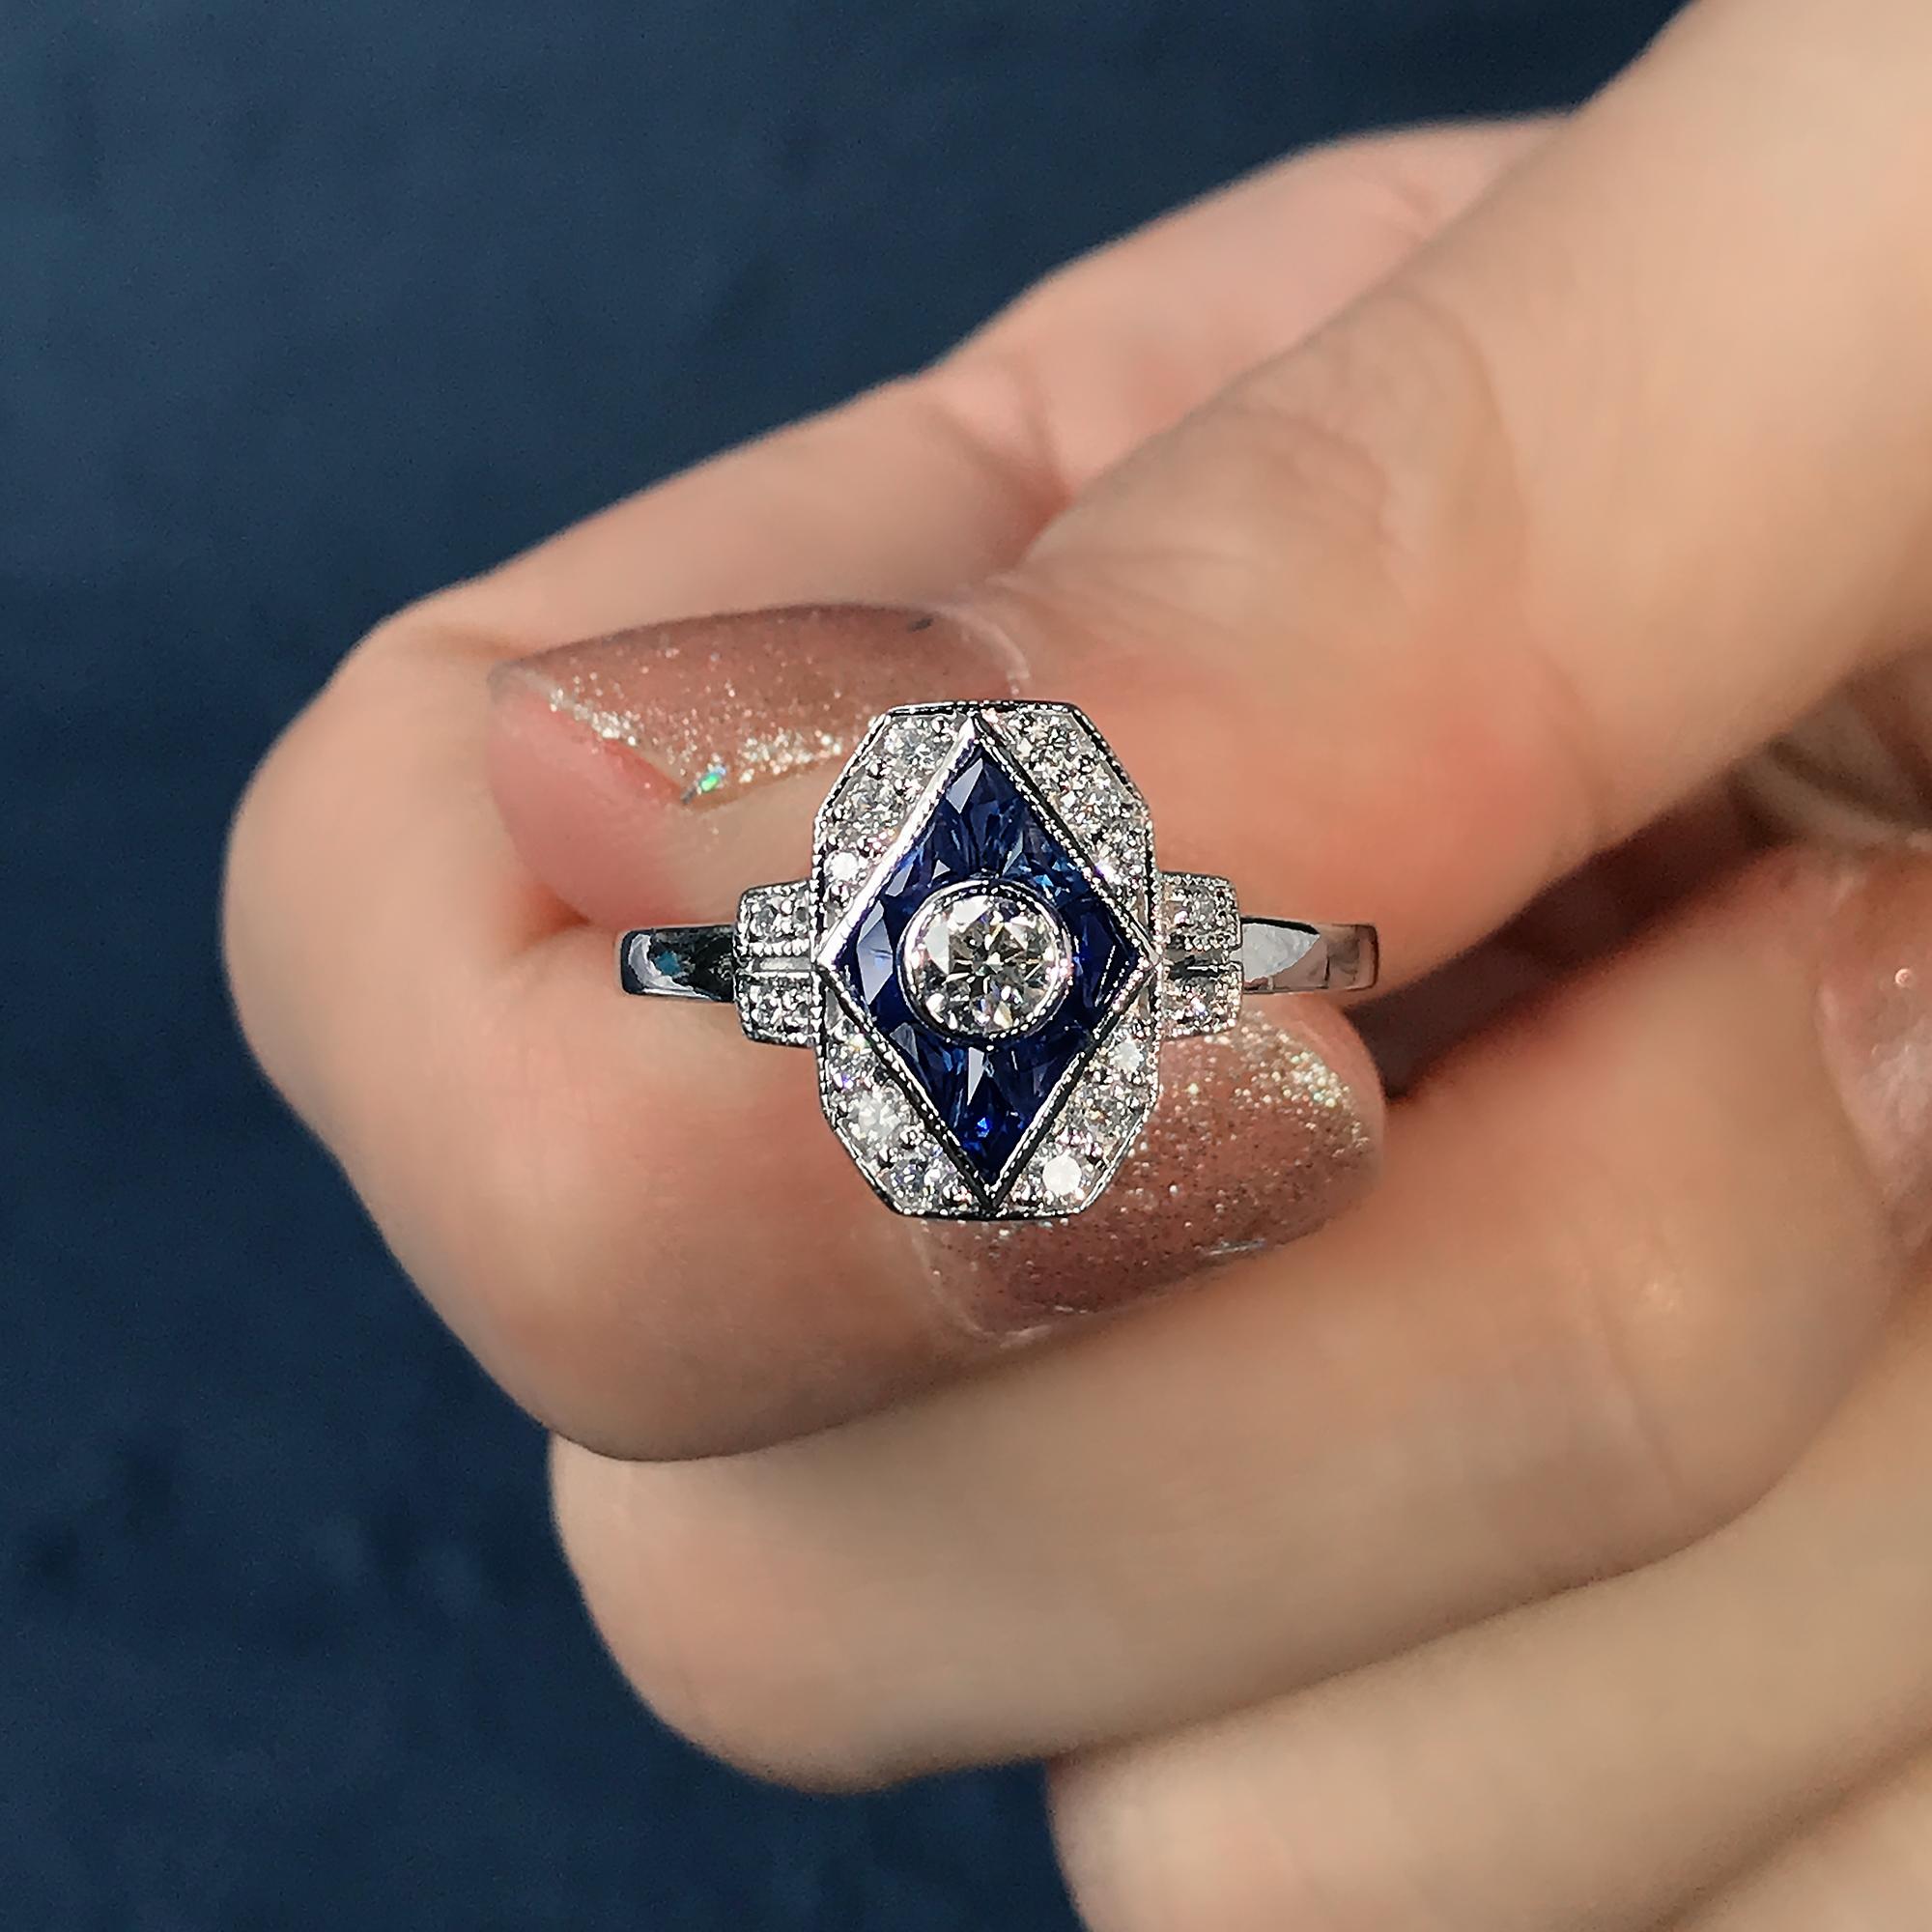 This beautiful ring is a vintage inspired style, the halo ring features round H color SI clarity diamond for its center, surrounded by French cut blue sapphire and round diamonds. This would make a wonderful engagement ring, or to commemorate an